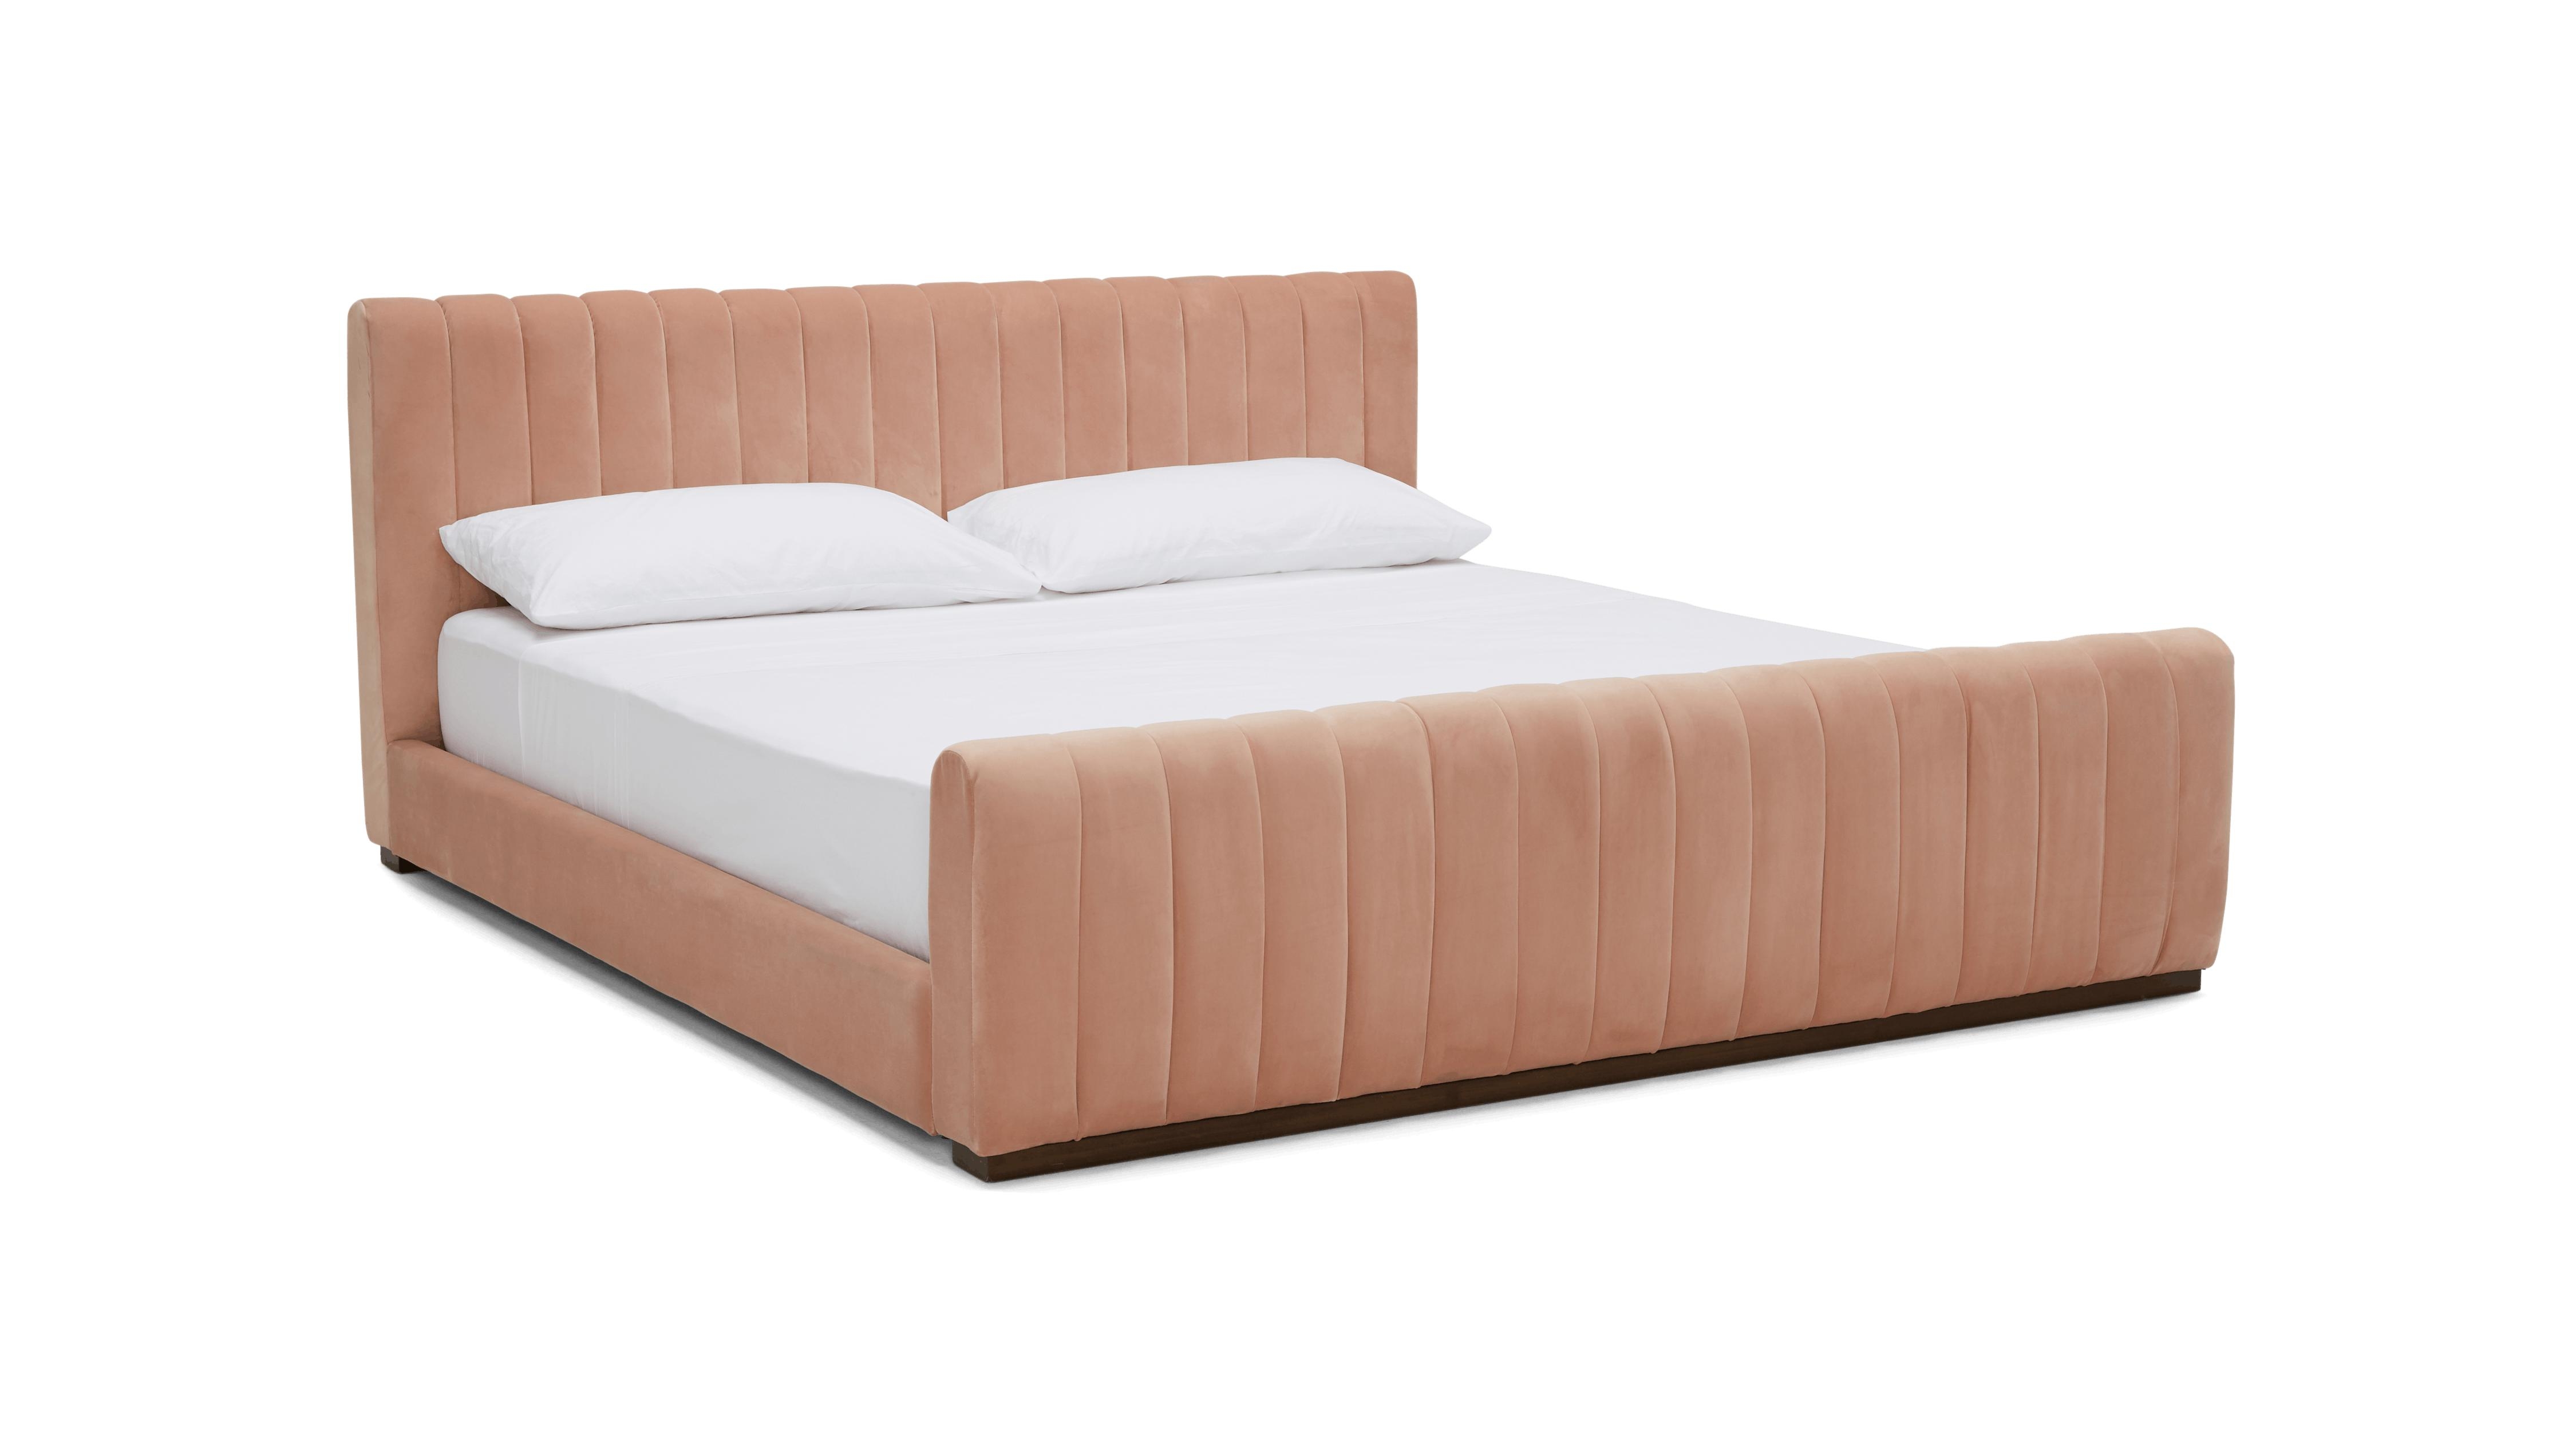 Pink Camille Mid Century Modern Bed - Royale Blush - Mocha - Queen - Image 1